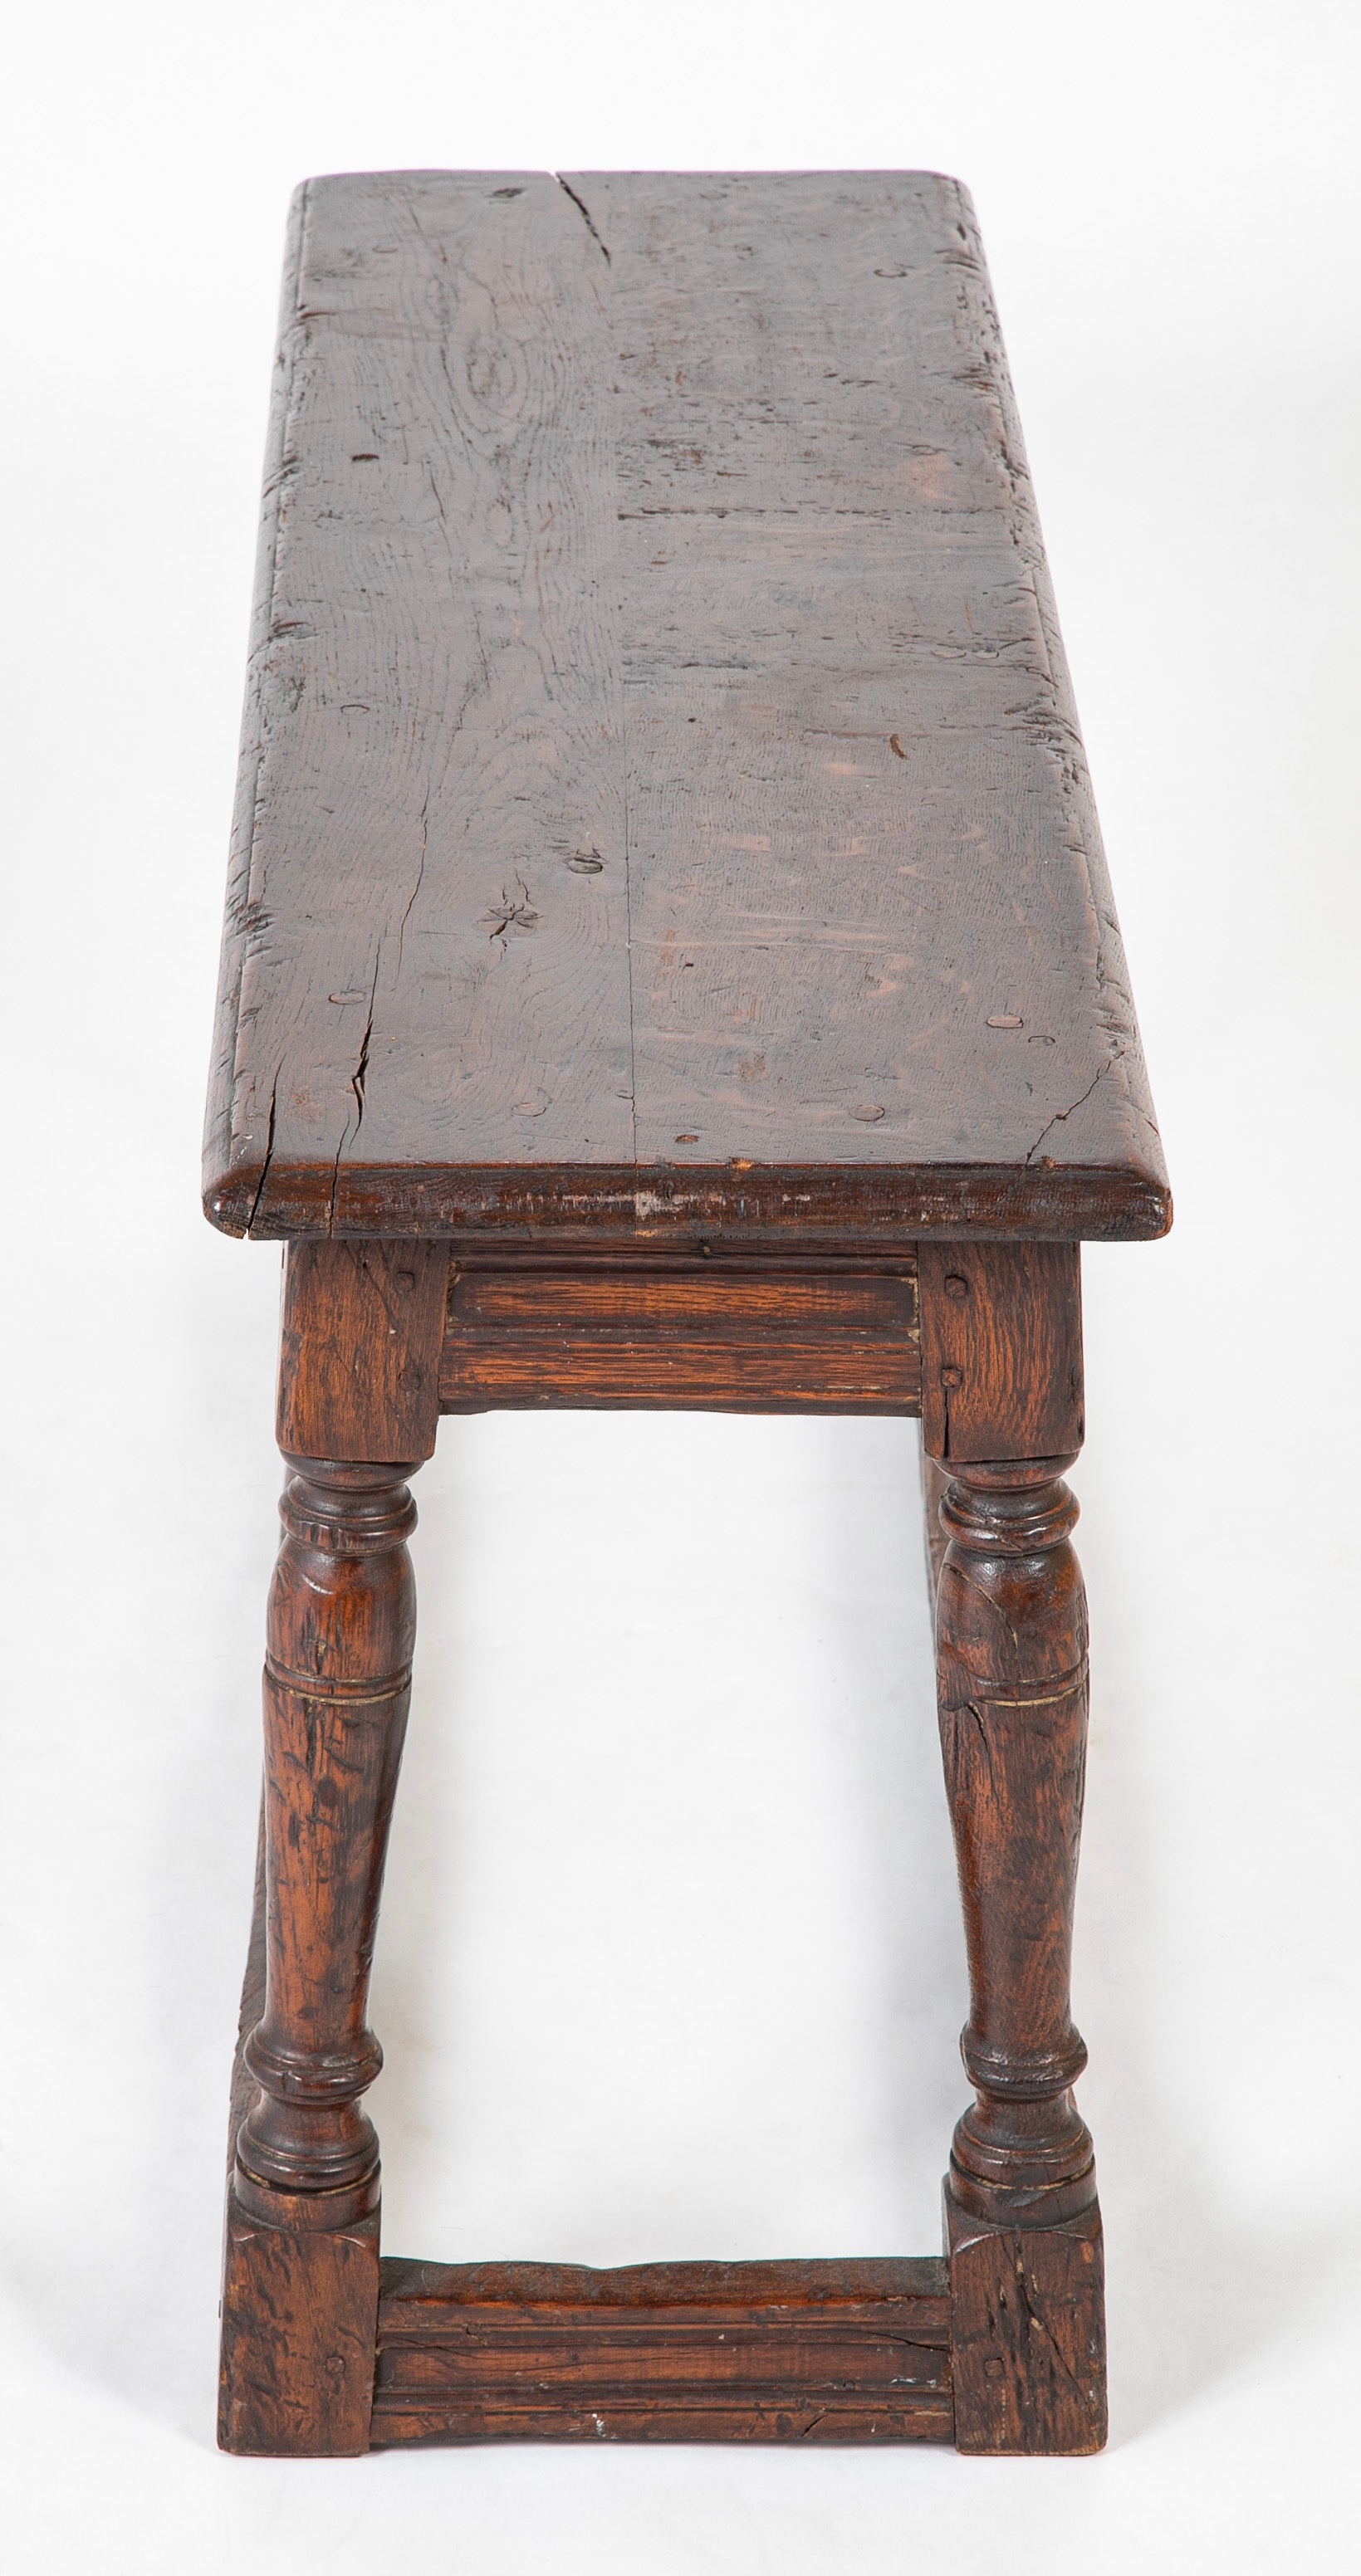 Jacobean Oak "Joint Stool" Bench with Pegged Construction